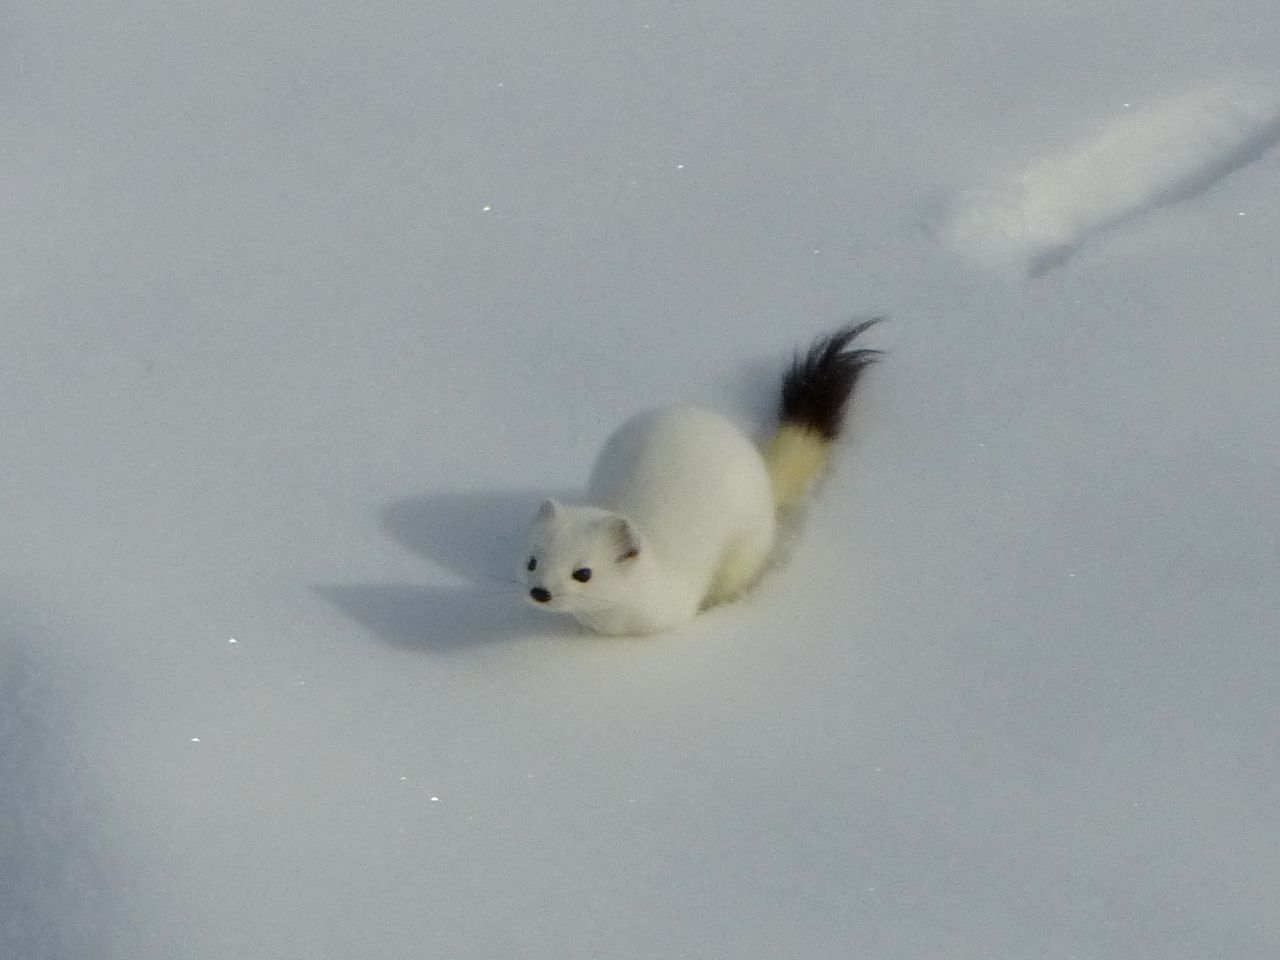 Ermine in winter color, you can see a black spot on the tail